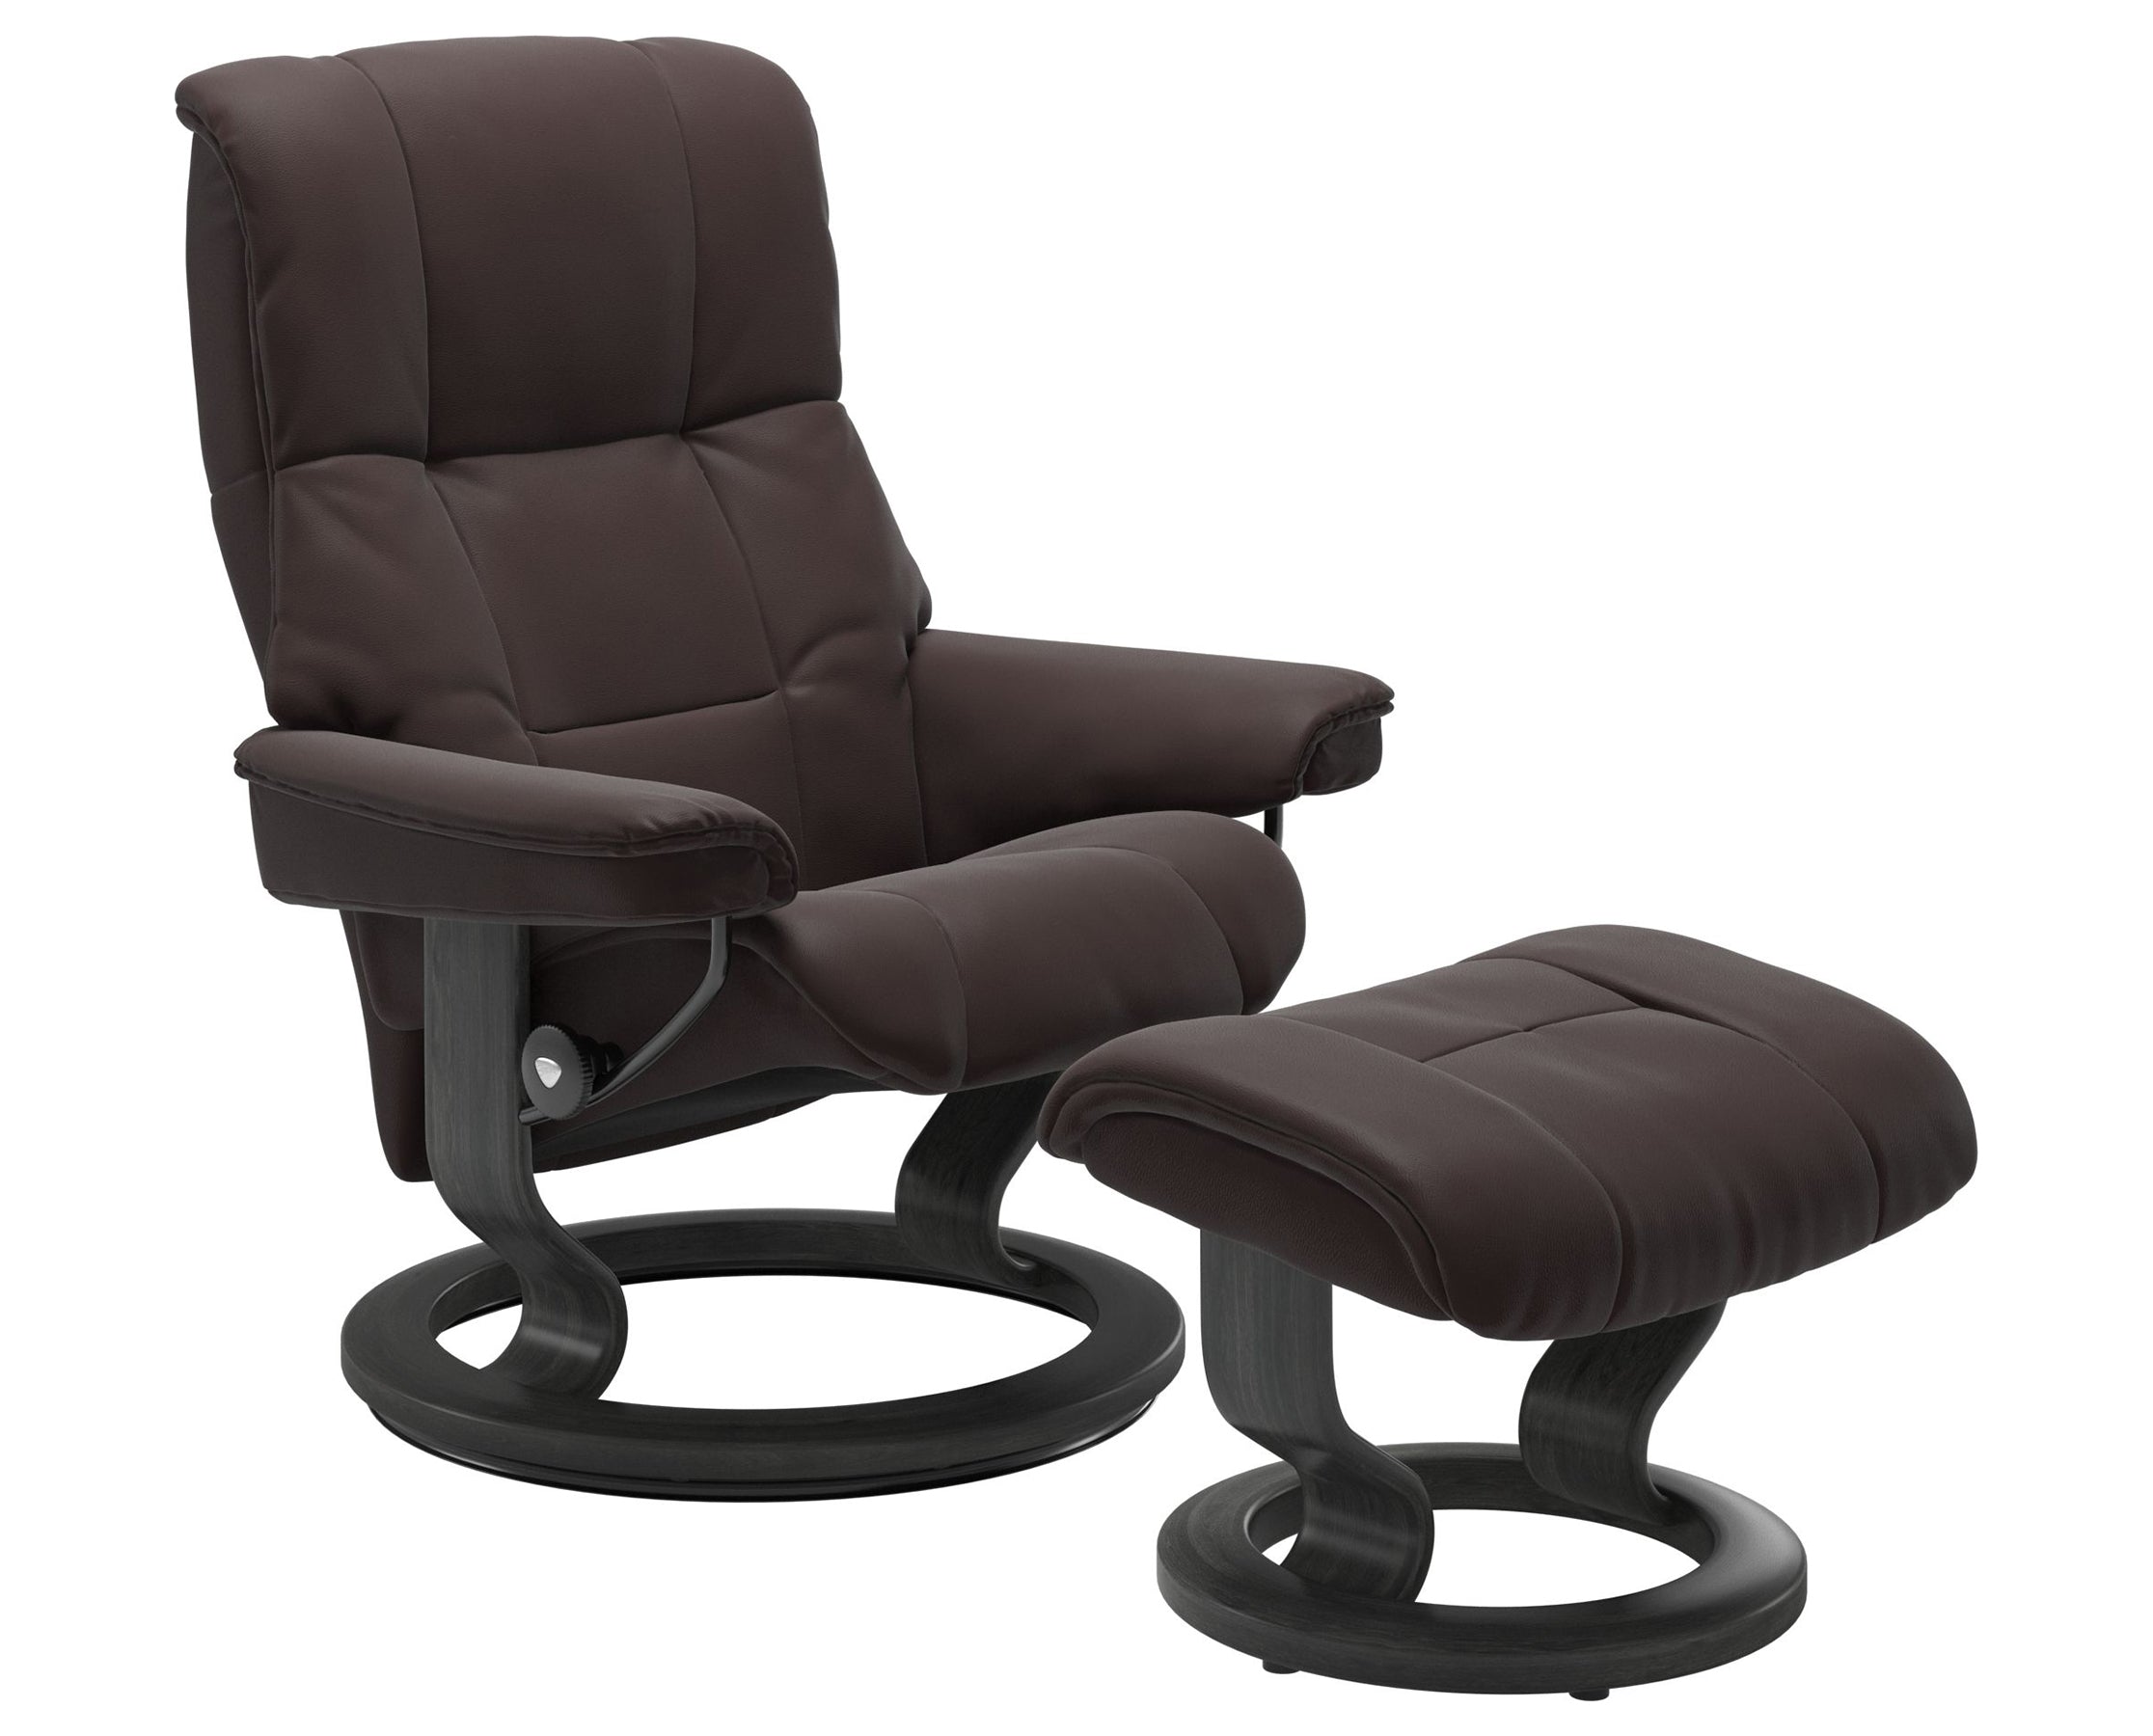 Paloma Leather Chocolate S/M/L and Grey Base | Stressless Mayfair Classic Recliner | Valley Ridge Furniture